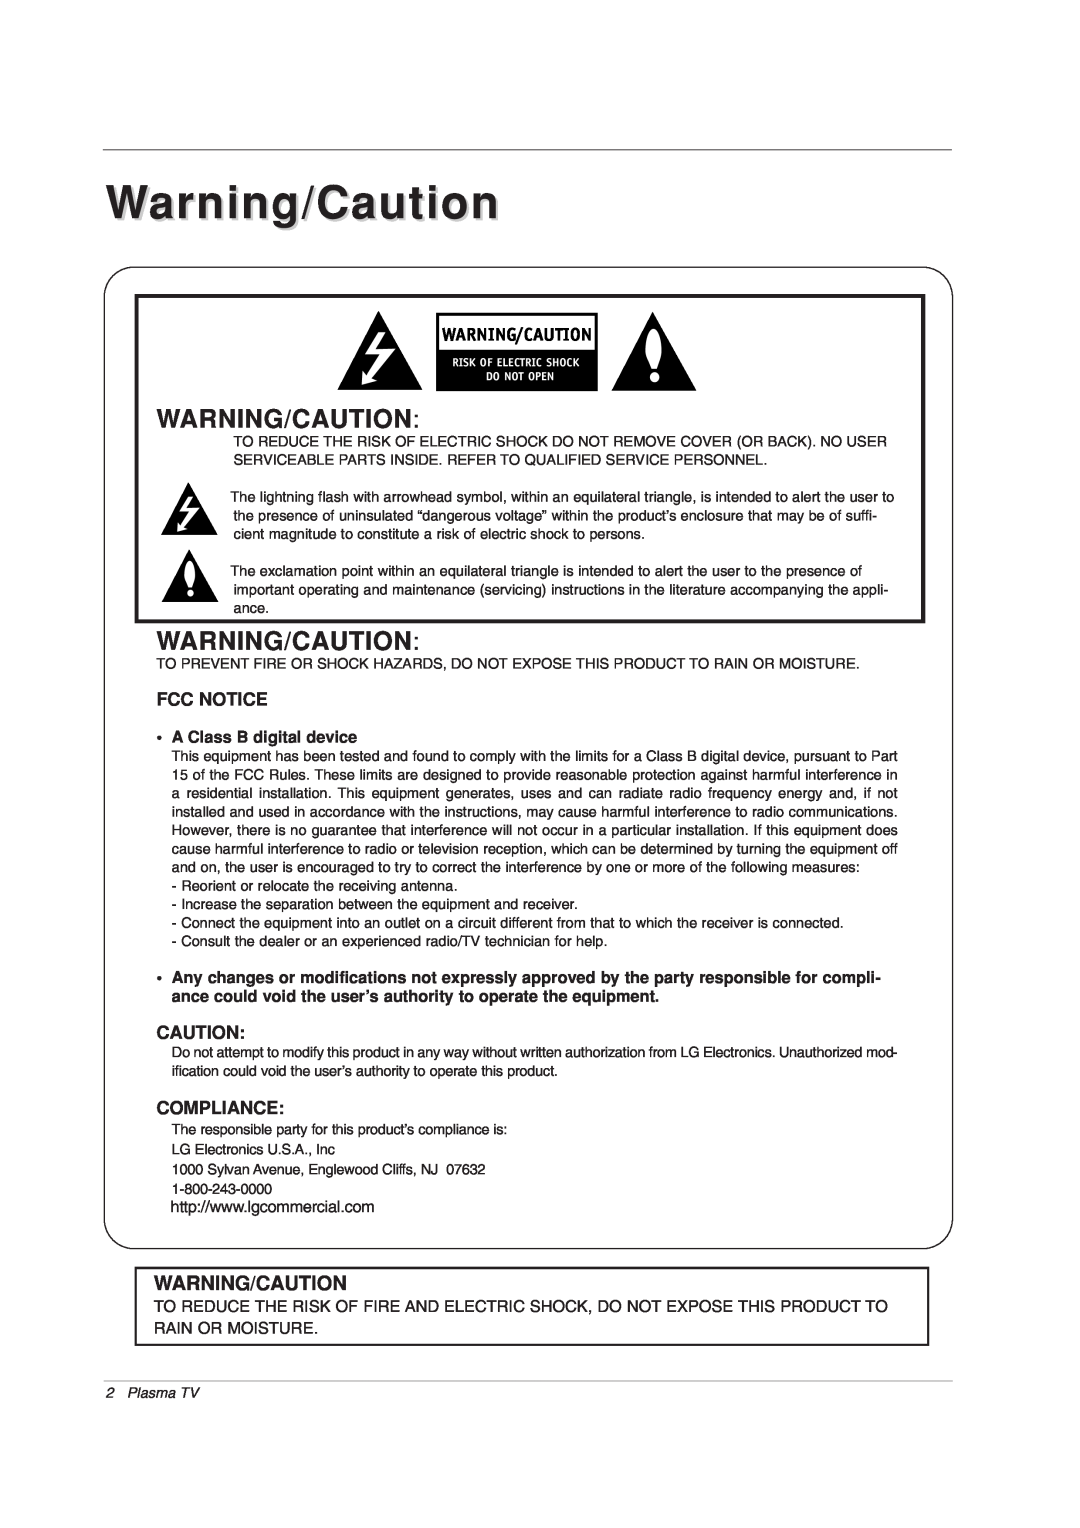 LG Electronics 42PX7DC owner manual Warning/Caution, Fcc Notice, Compliance, A Class B digital device, Plasma TV 